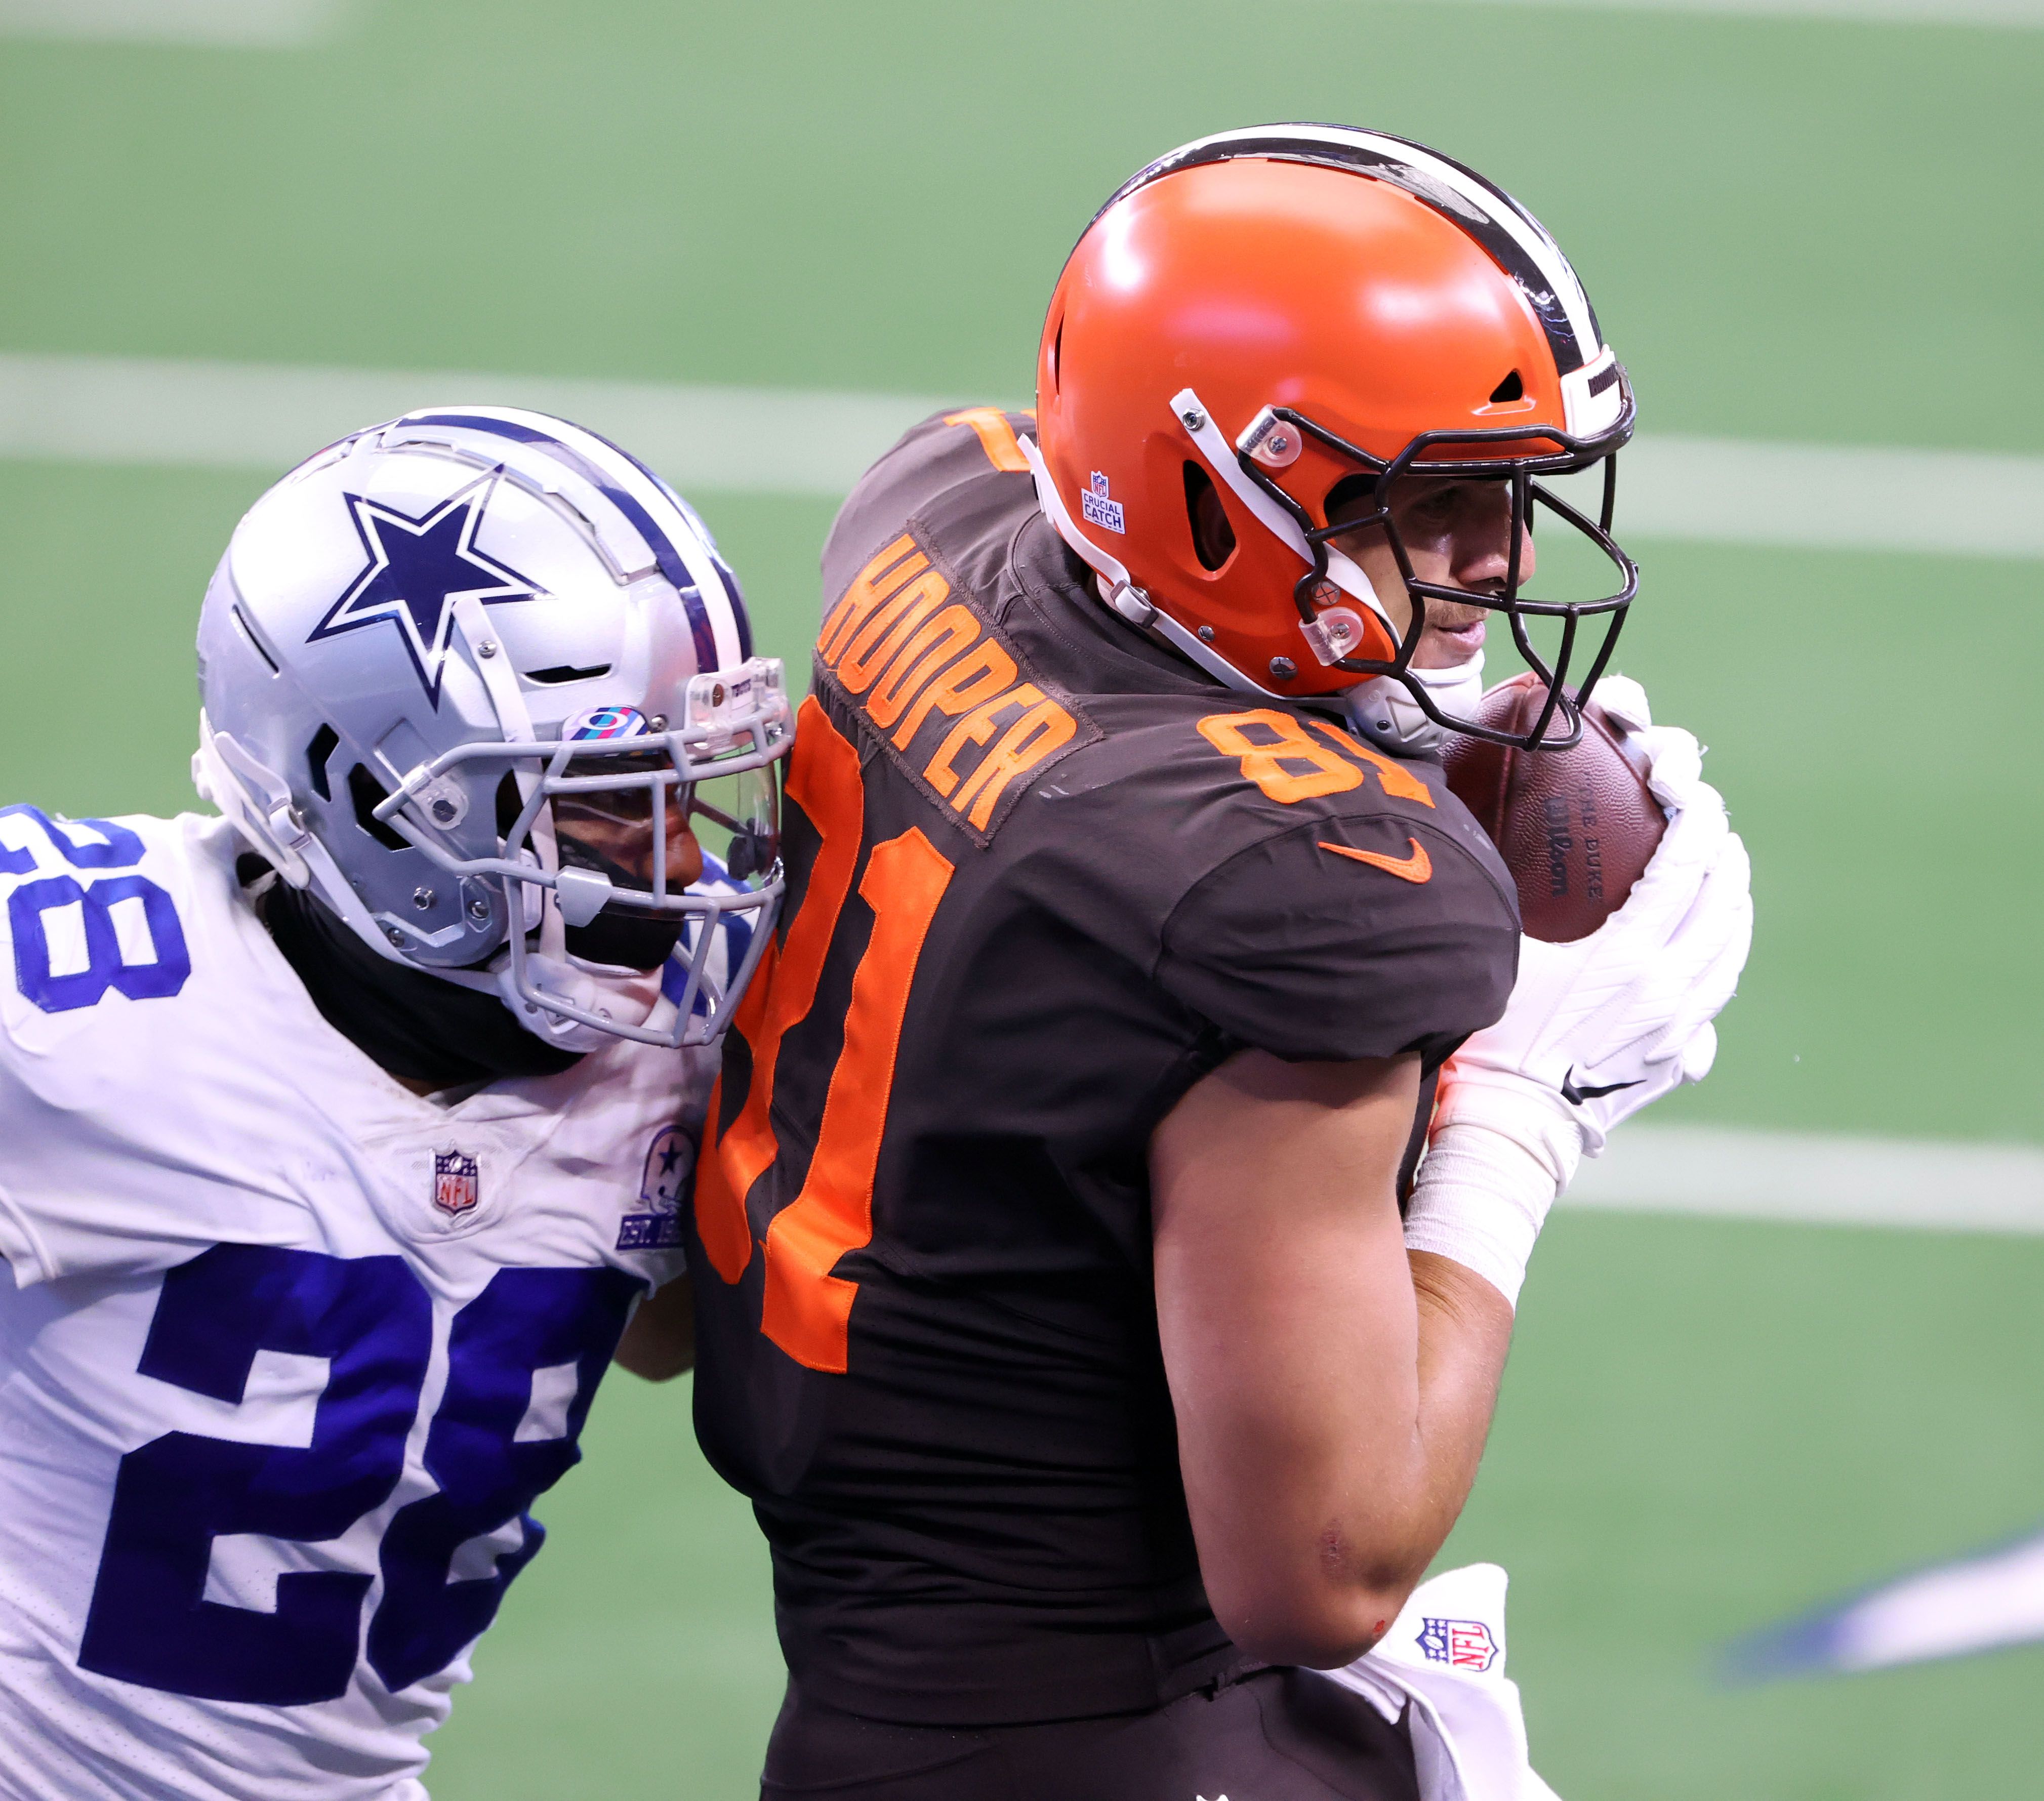 How to Watch Cleveland Browns at Dallas Cowboys on October 4, 2020